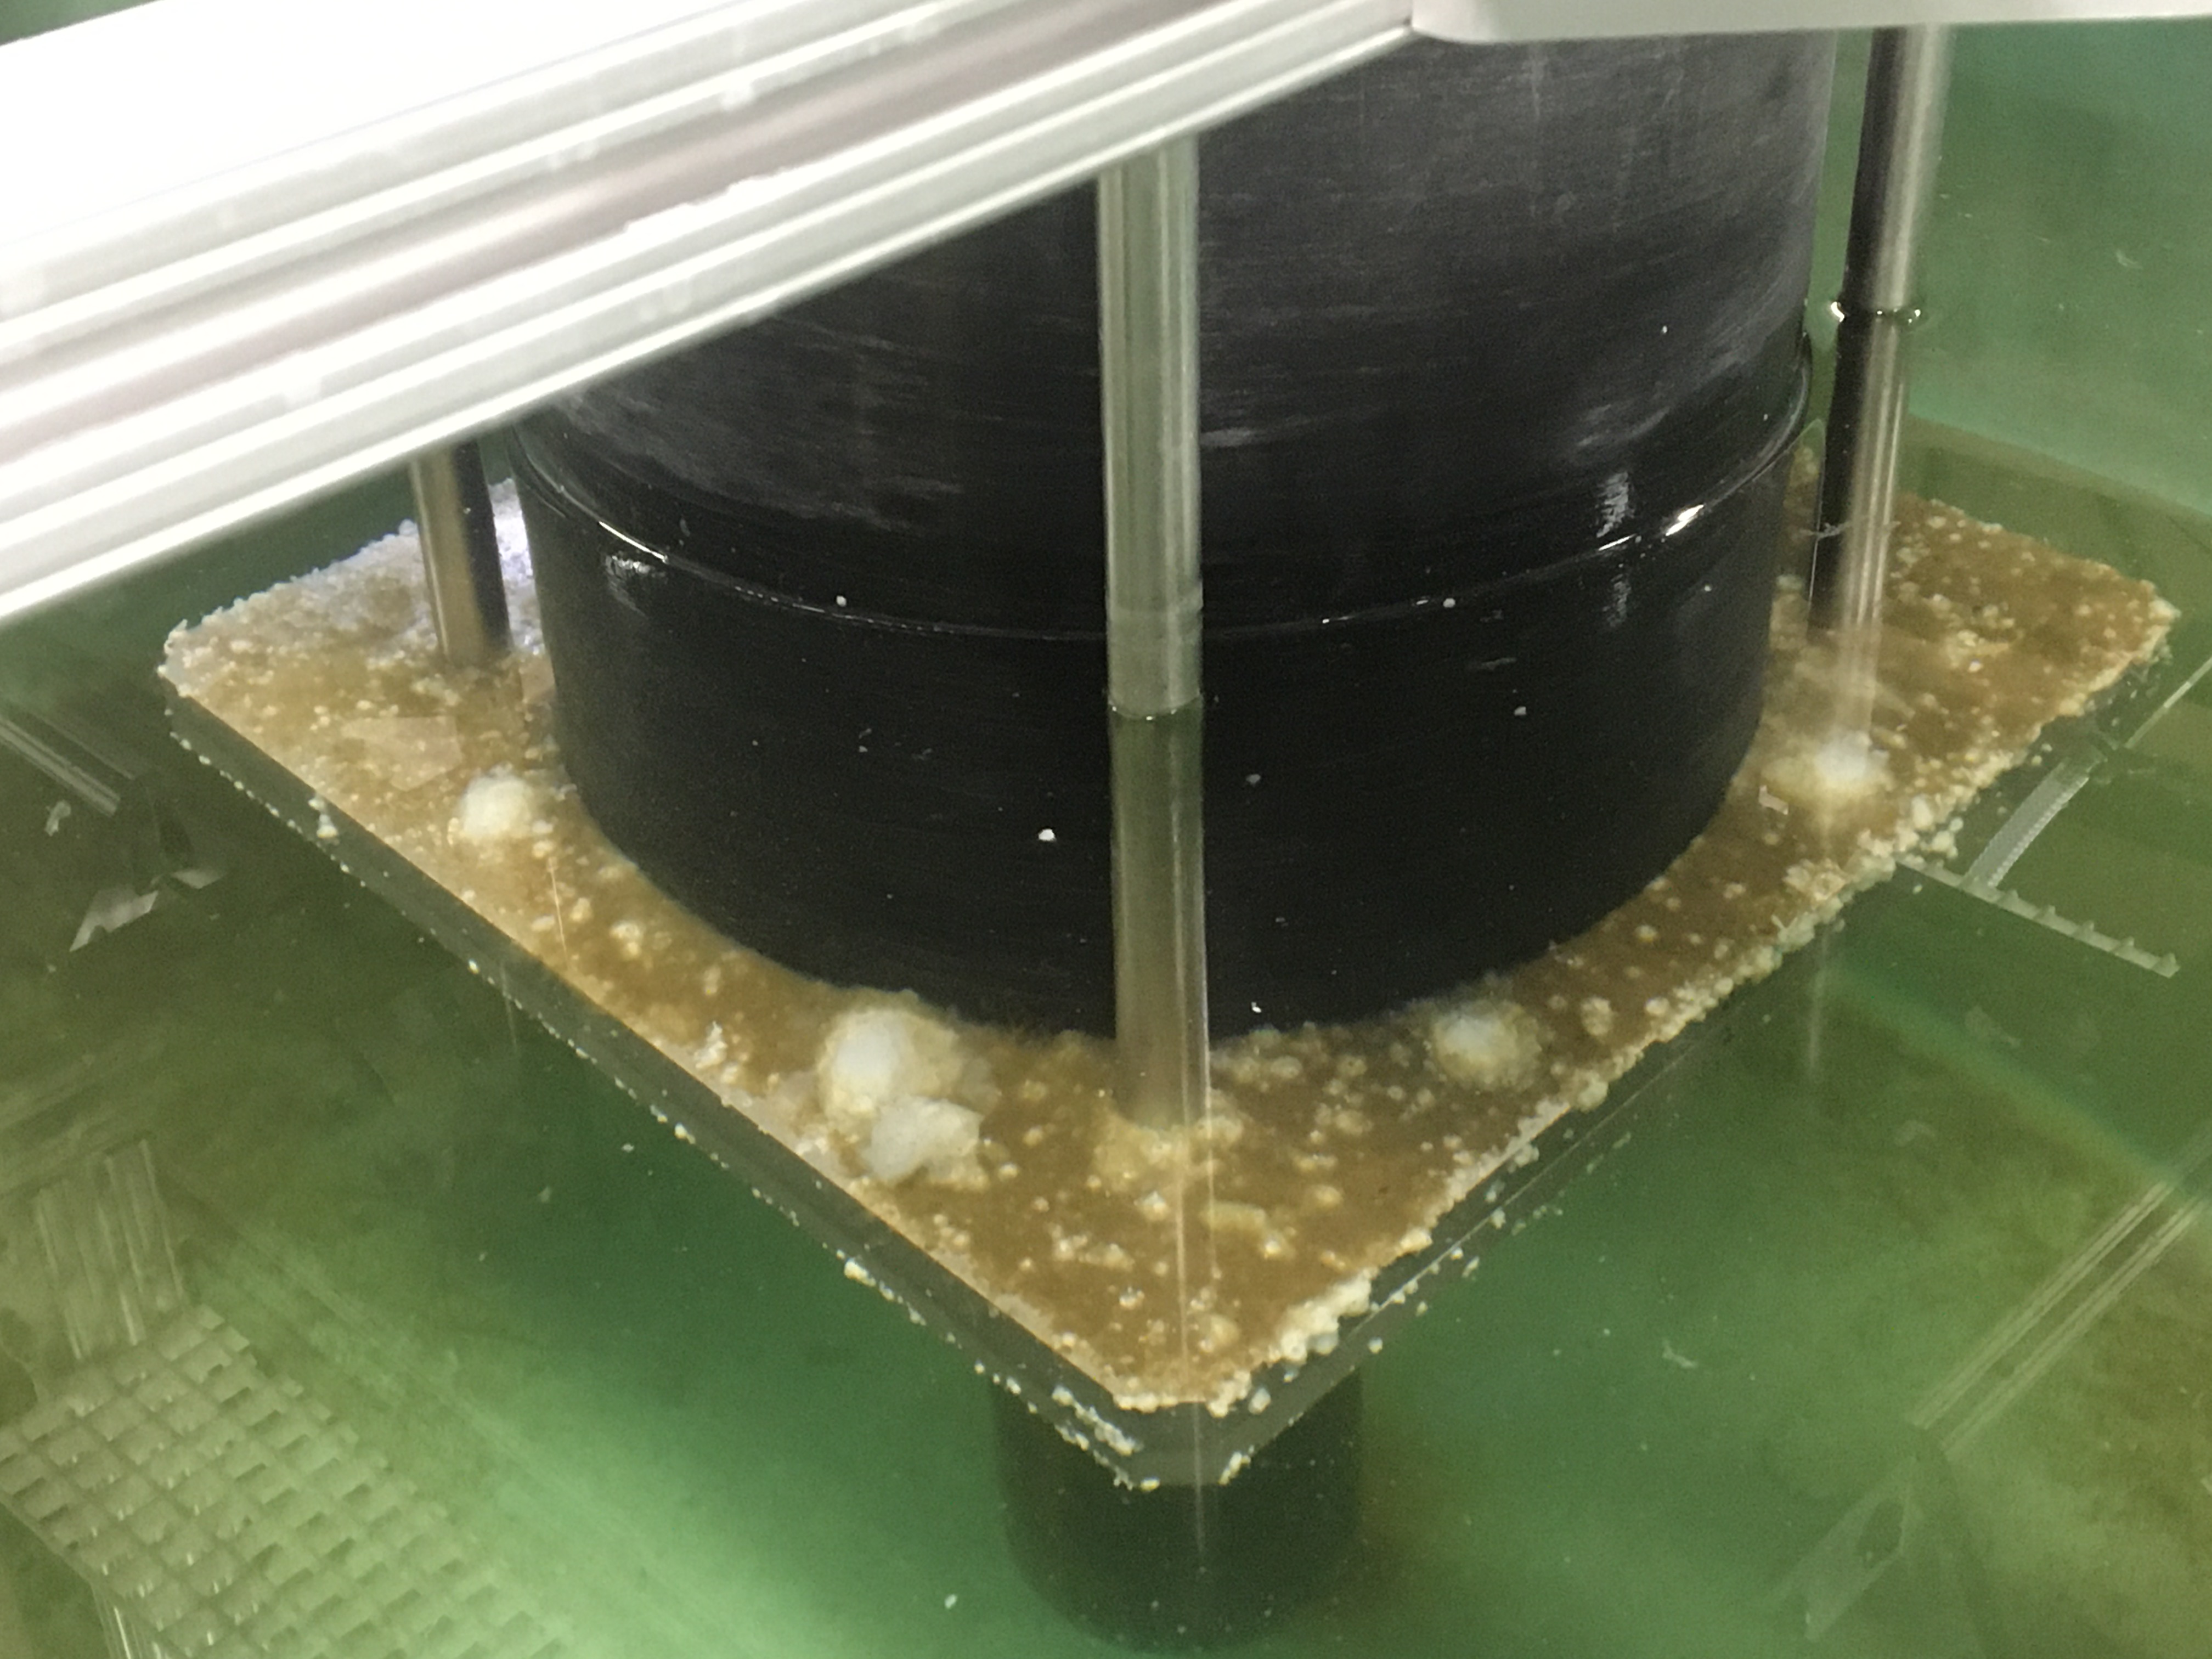 Biofouling on a wave energy converter in a seawater testing tank.